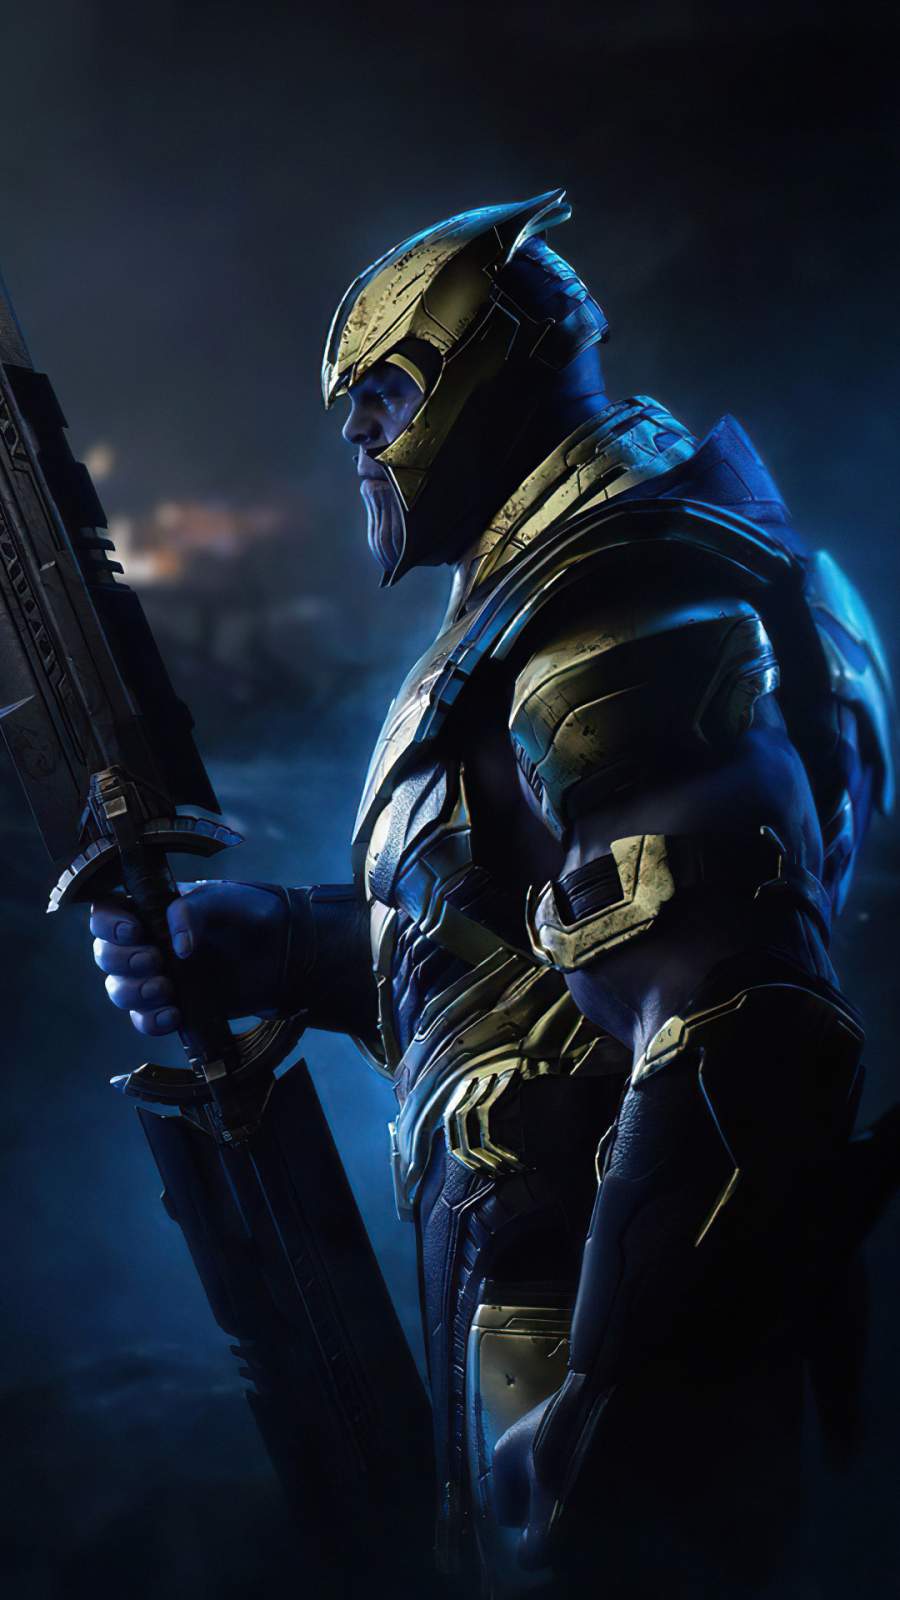 Thanos 4K IPhone Wallpaper - IPhone Wallpapers : iPhone Wallpapers